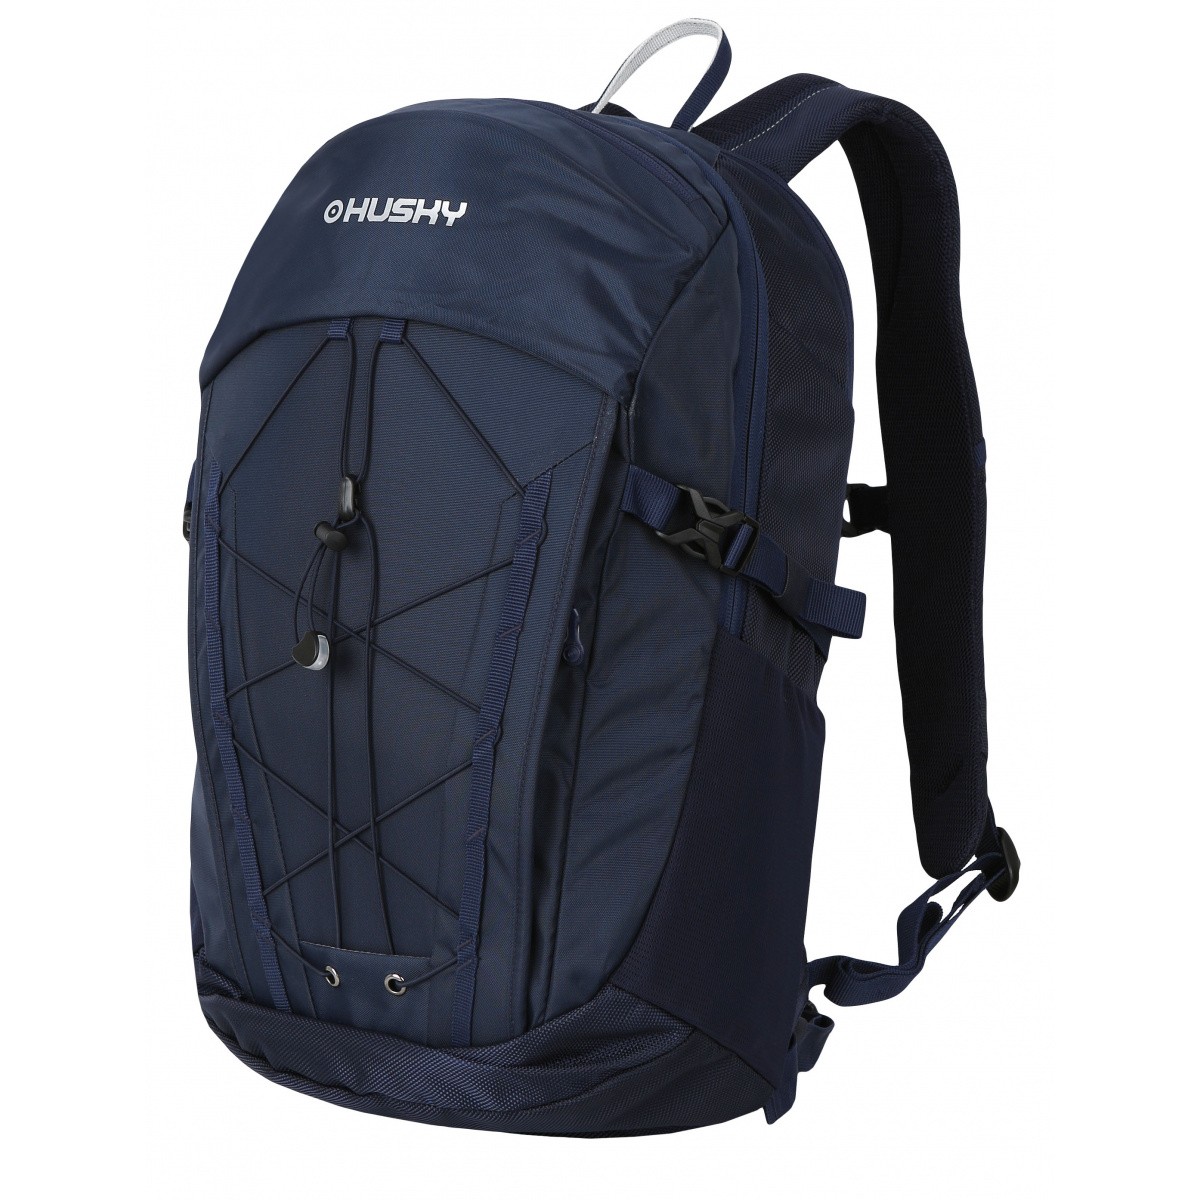 Backpack Nory 22 HUSKY - view 4